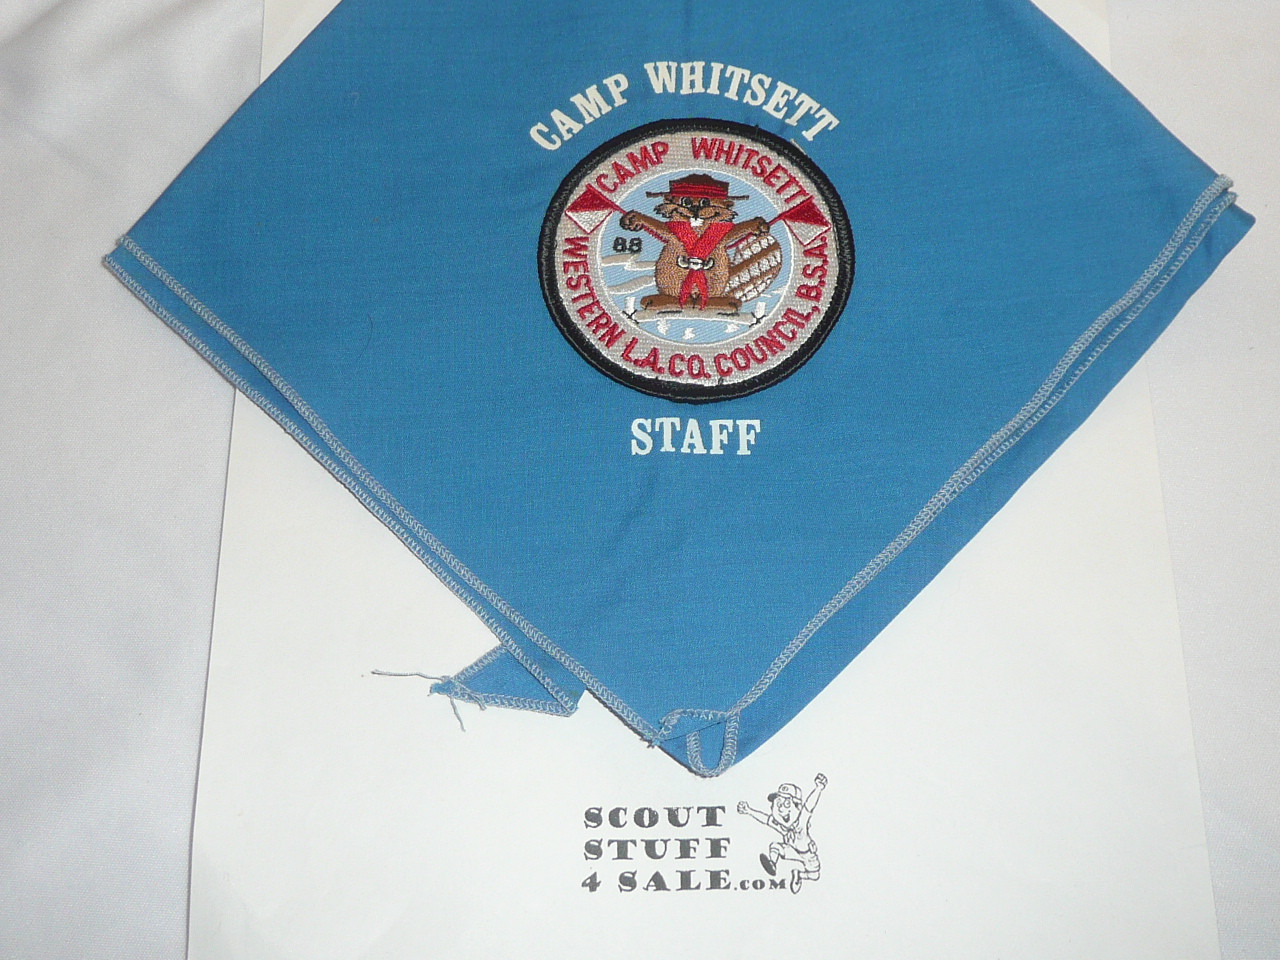 1988 Camp Whitsett STAFF Neckerchief, Western Los Angeles County Council